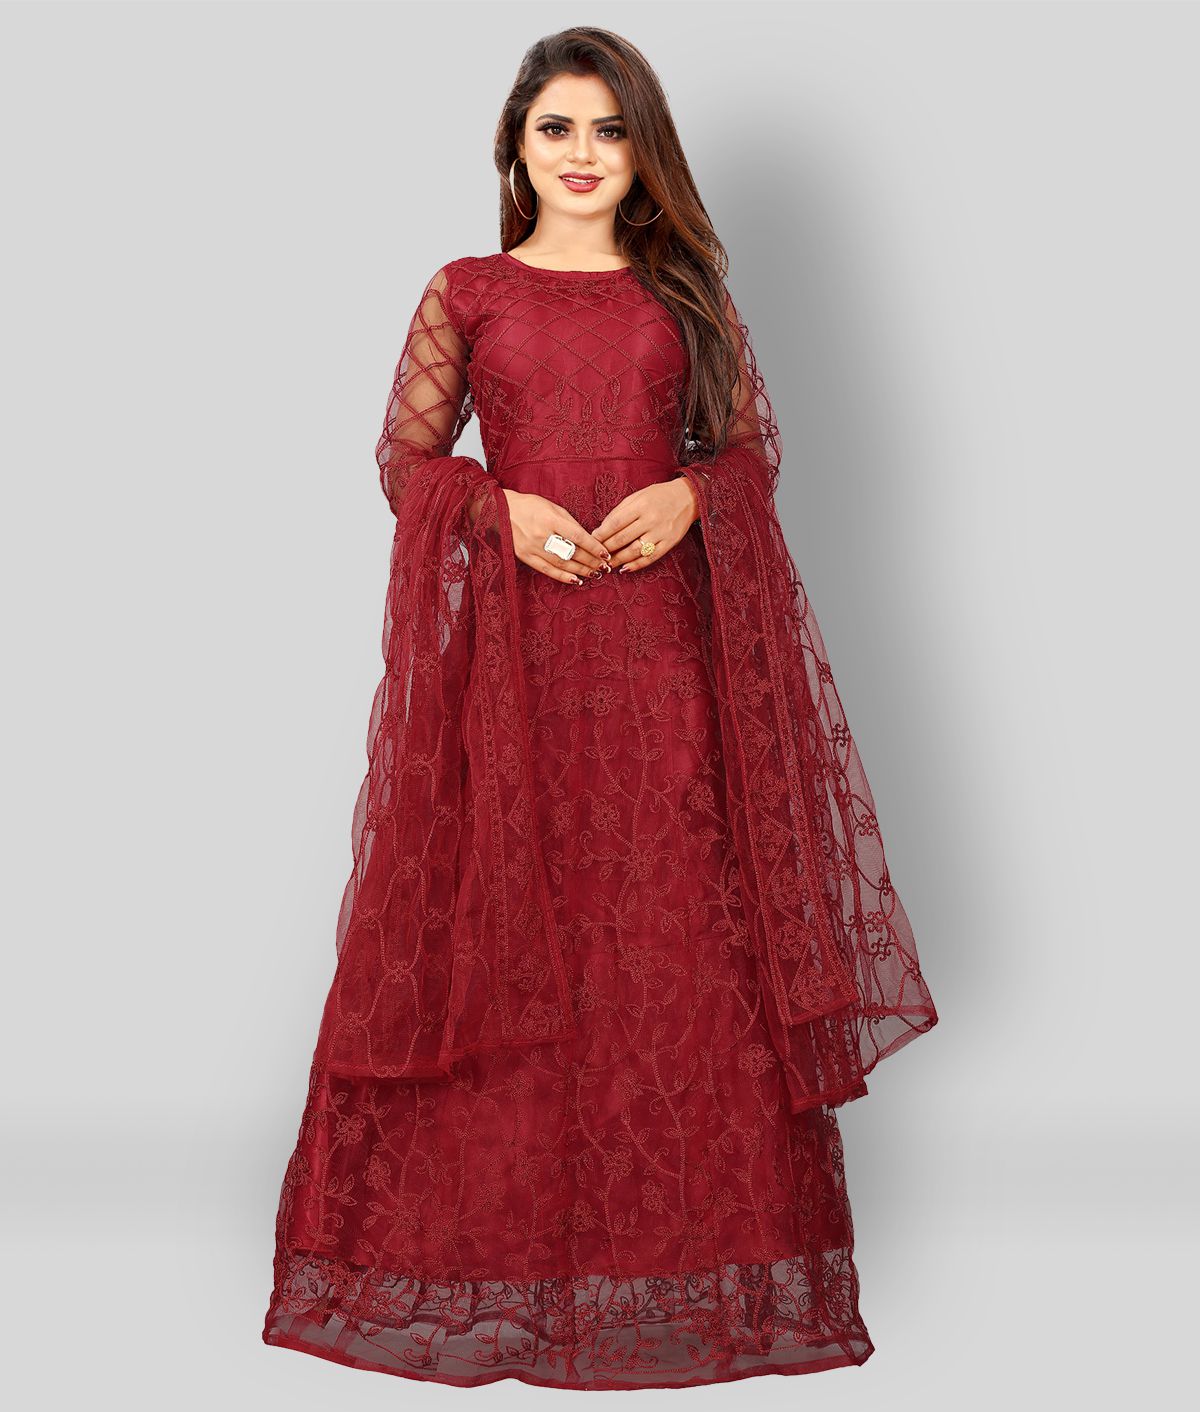     			Aika - Maroon Anarkali Net Women's Semi Stitched Ethnic Gown ( Pack of 1 )